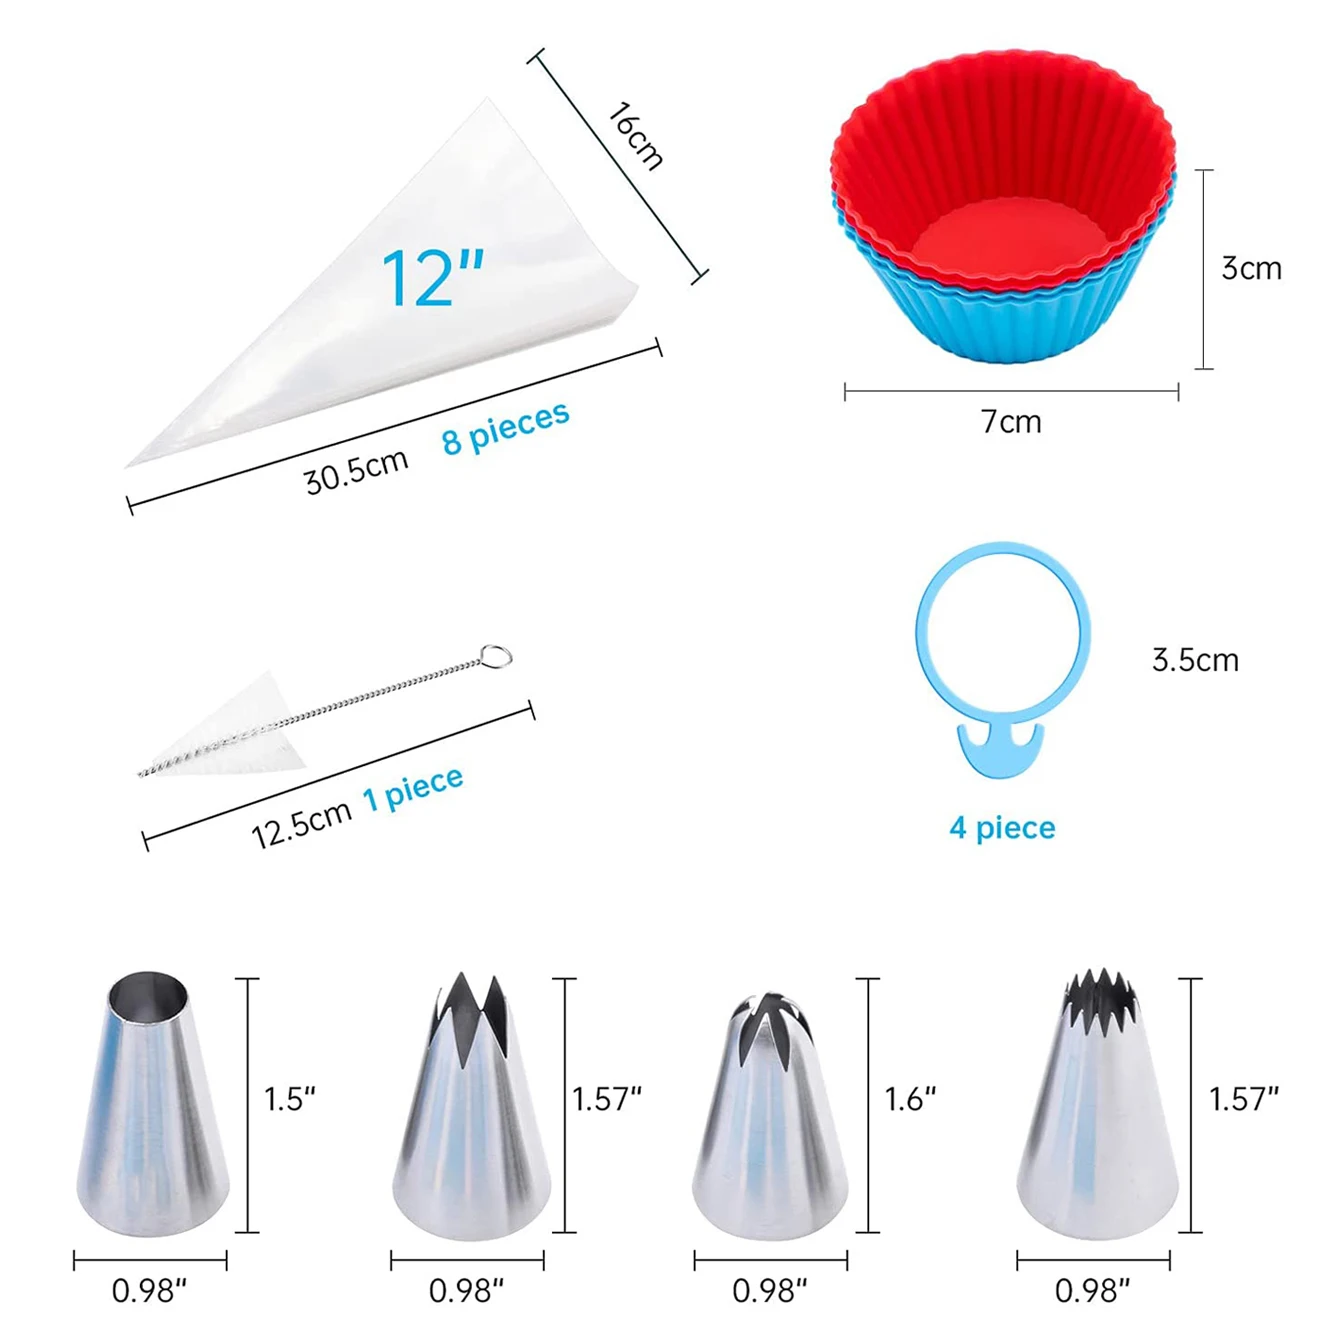 21pcs stainless steel piping tips and disposable PE pastry bag set baking cake decorating accessories